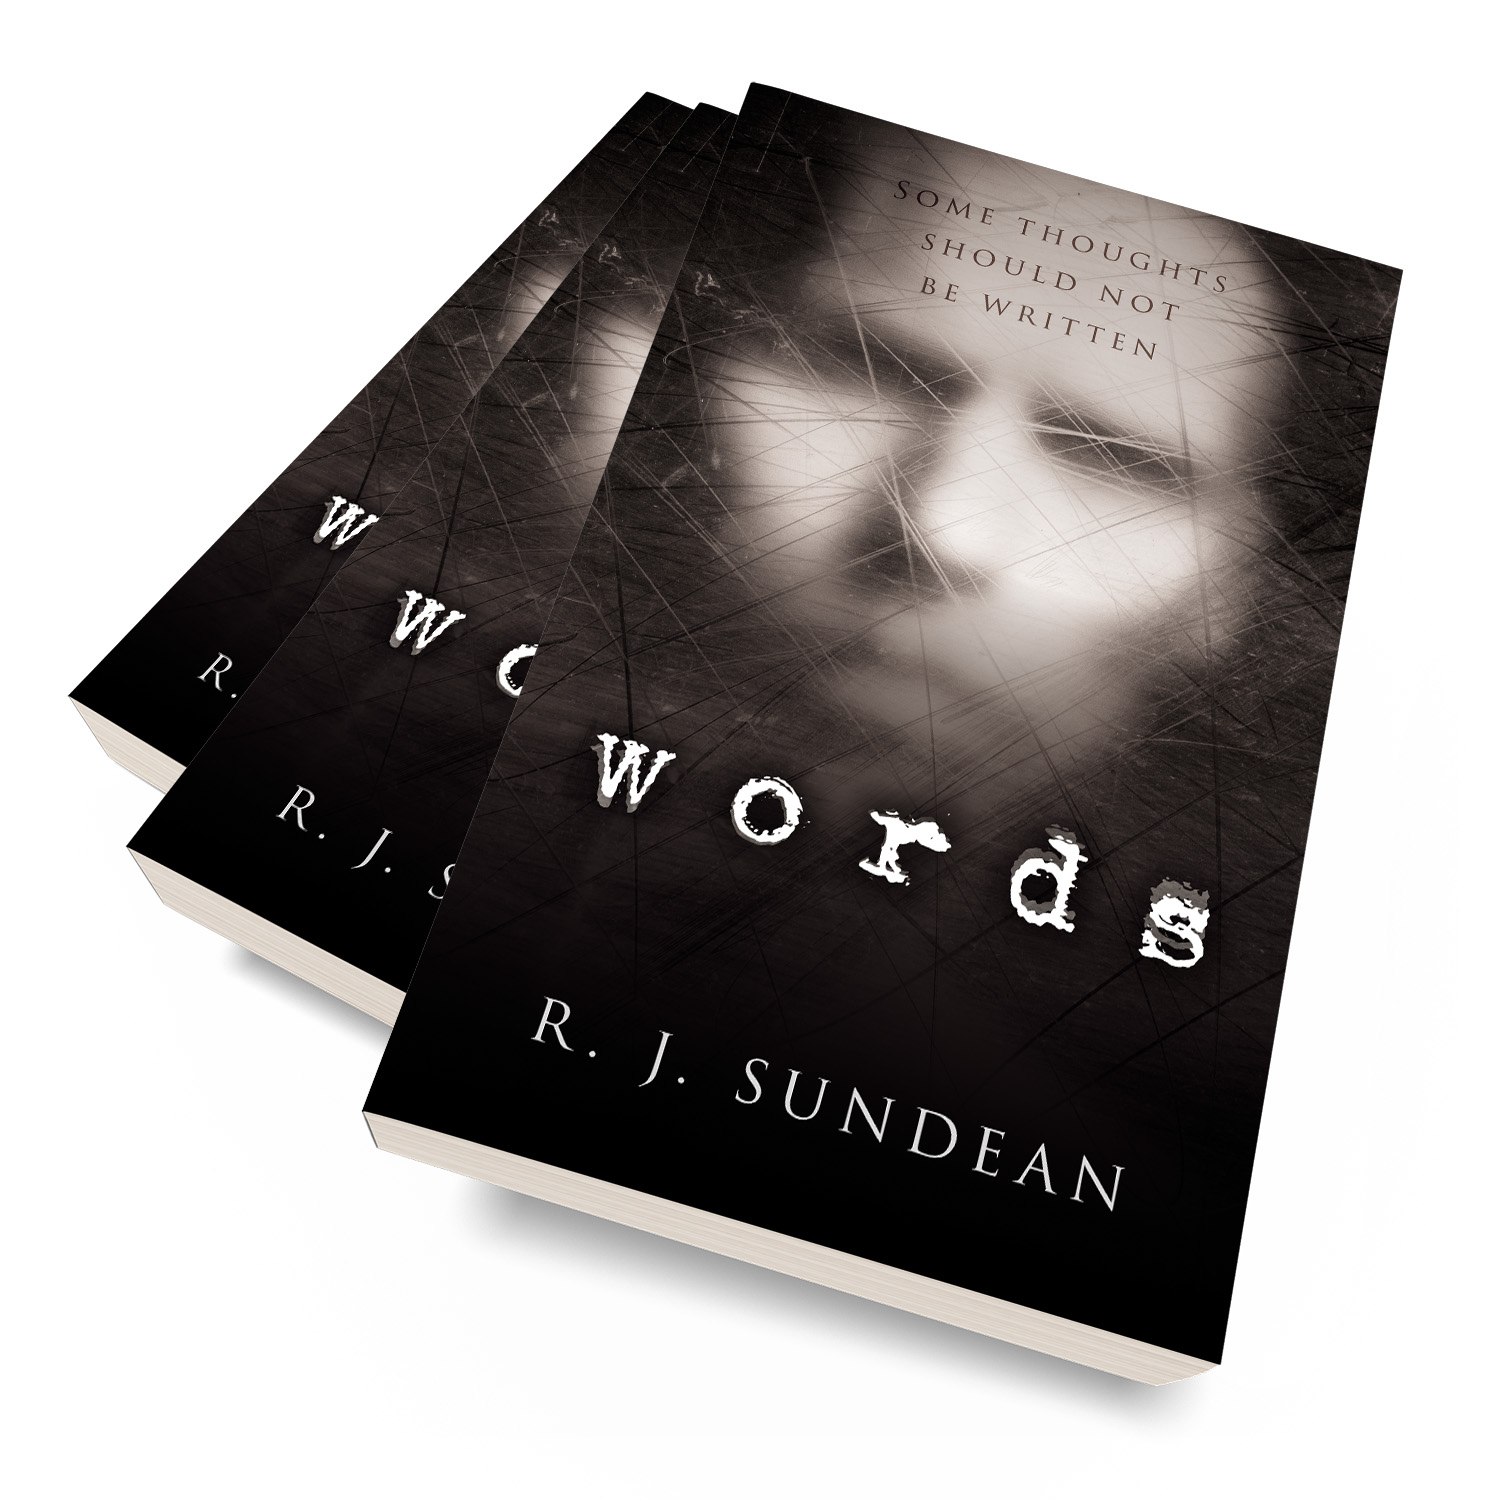 'Words' is literral and literary horror novel. The author is RJ Sundean. The book cover and interior design are by Mark Thomas. To learn more about what Mark could do for your book, please visit coverness.com.